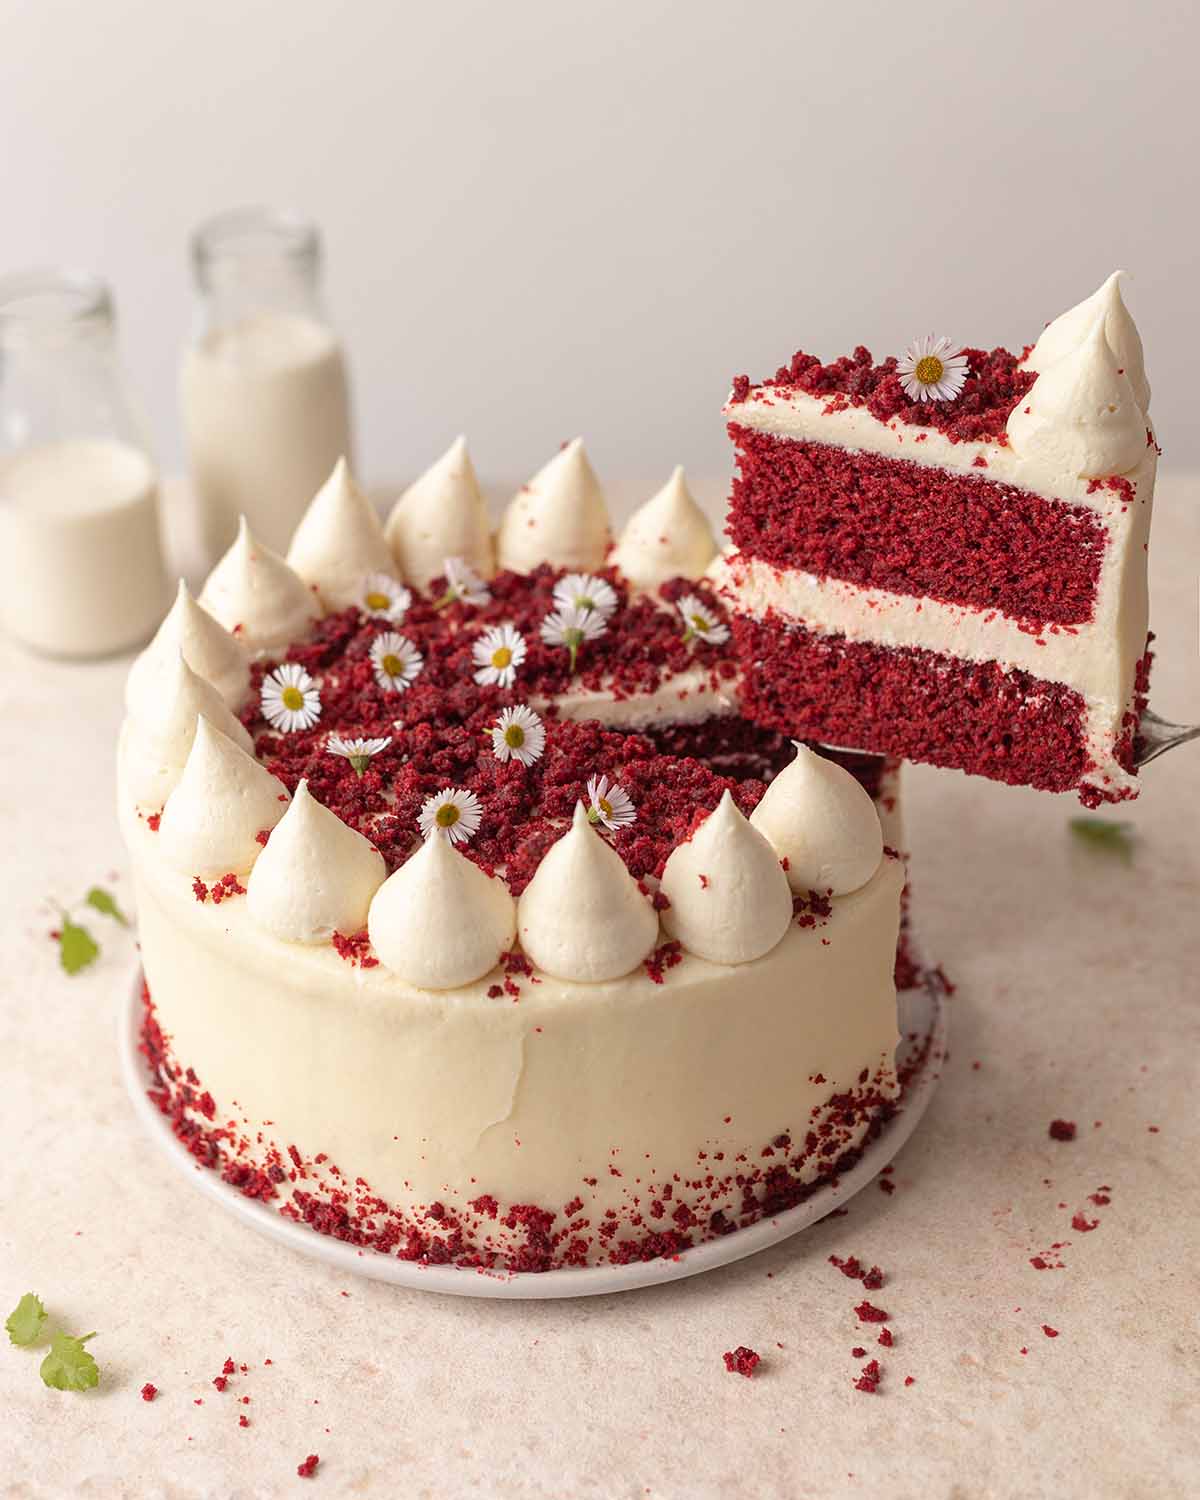 Red velvet cake on plate with slice cut out lifted up revealing layers.